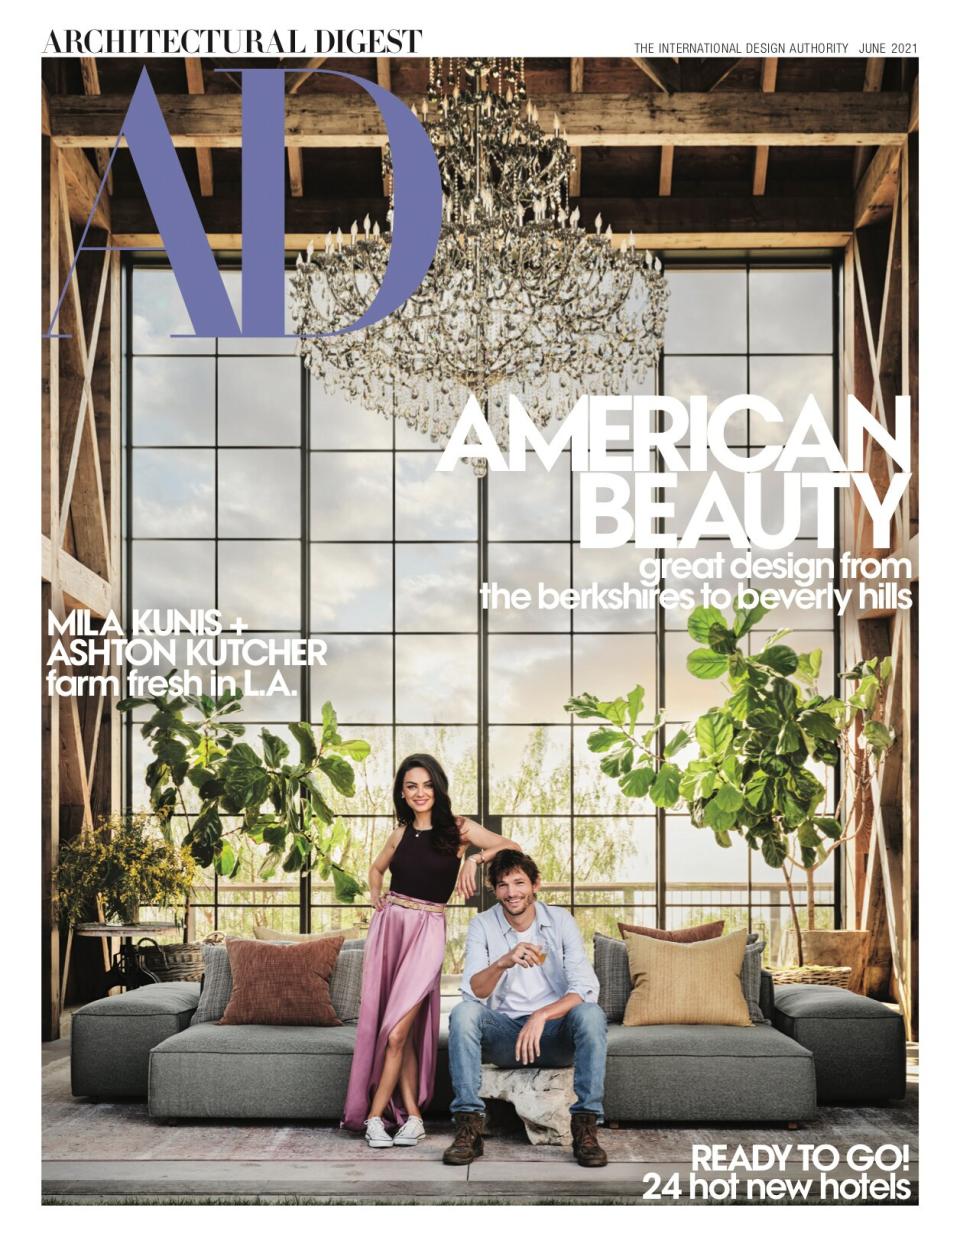 Mila Kunis and Ashton Kutcher for Architectural Digest